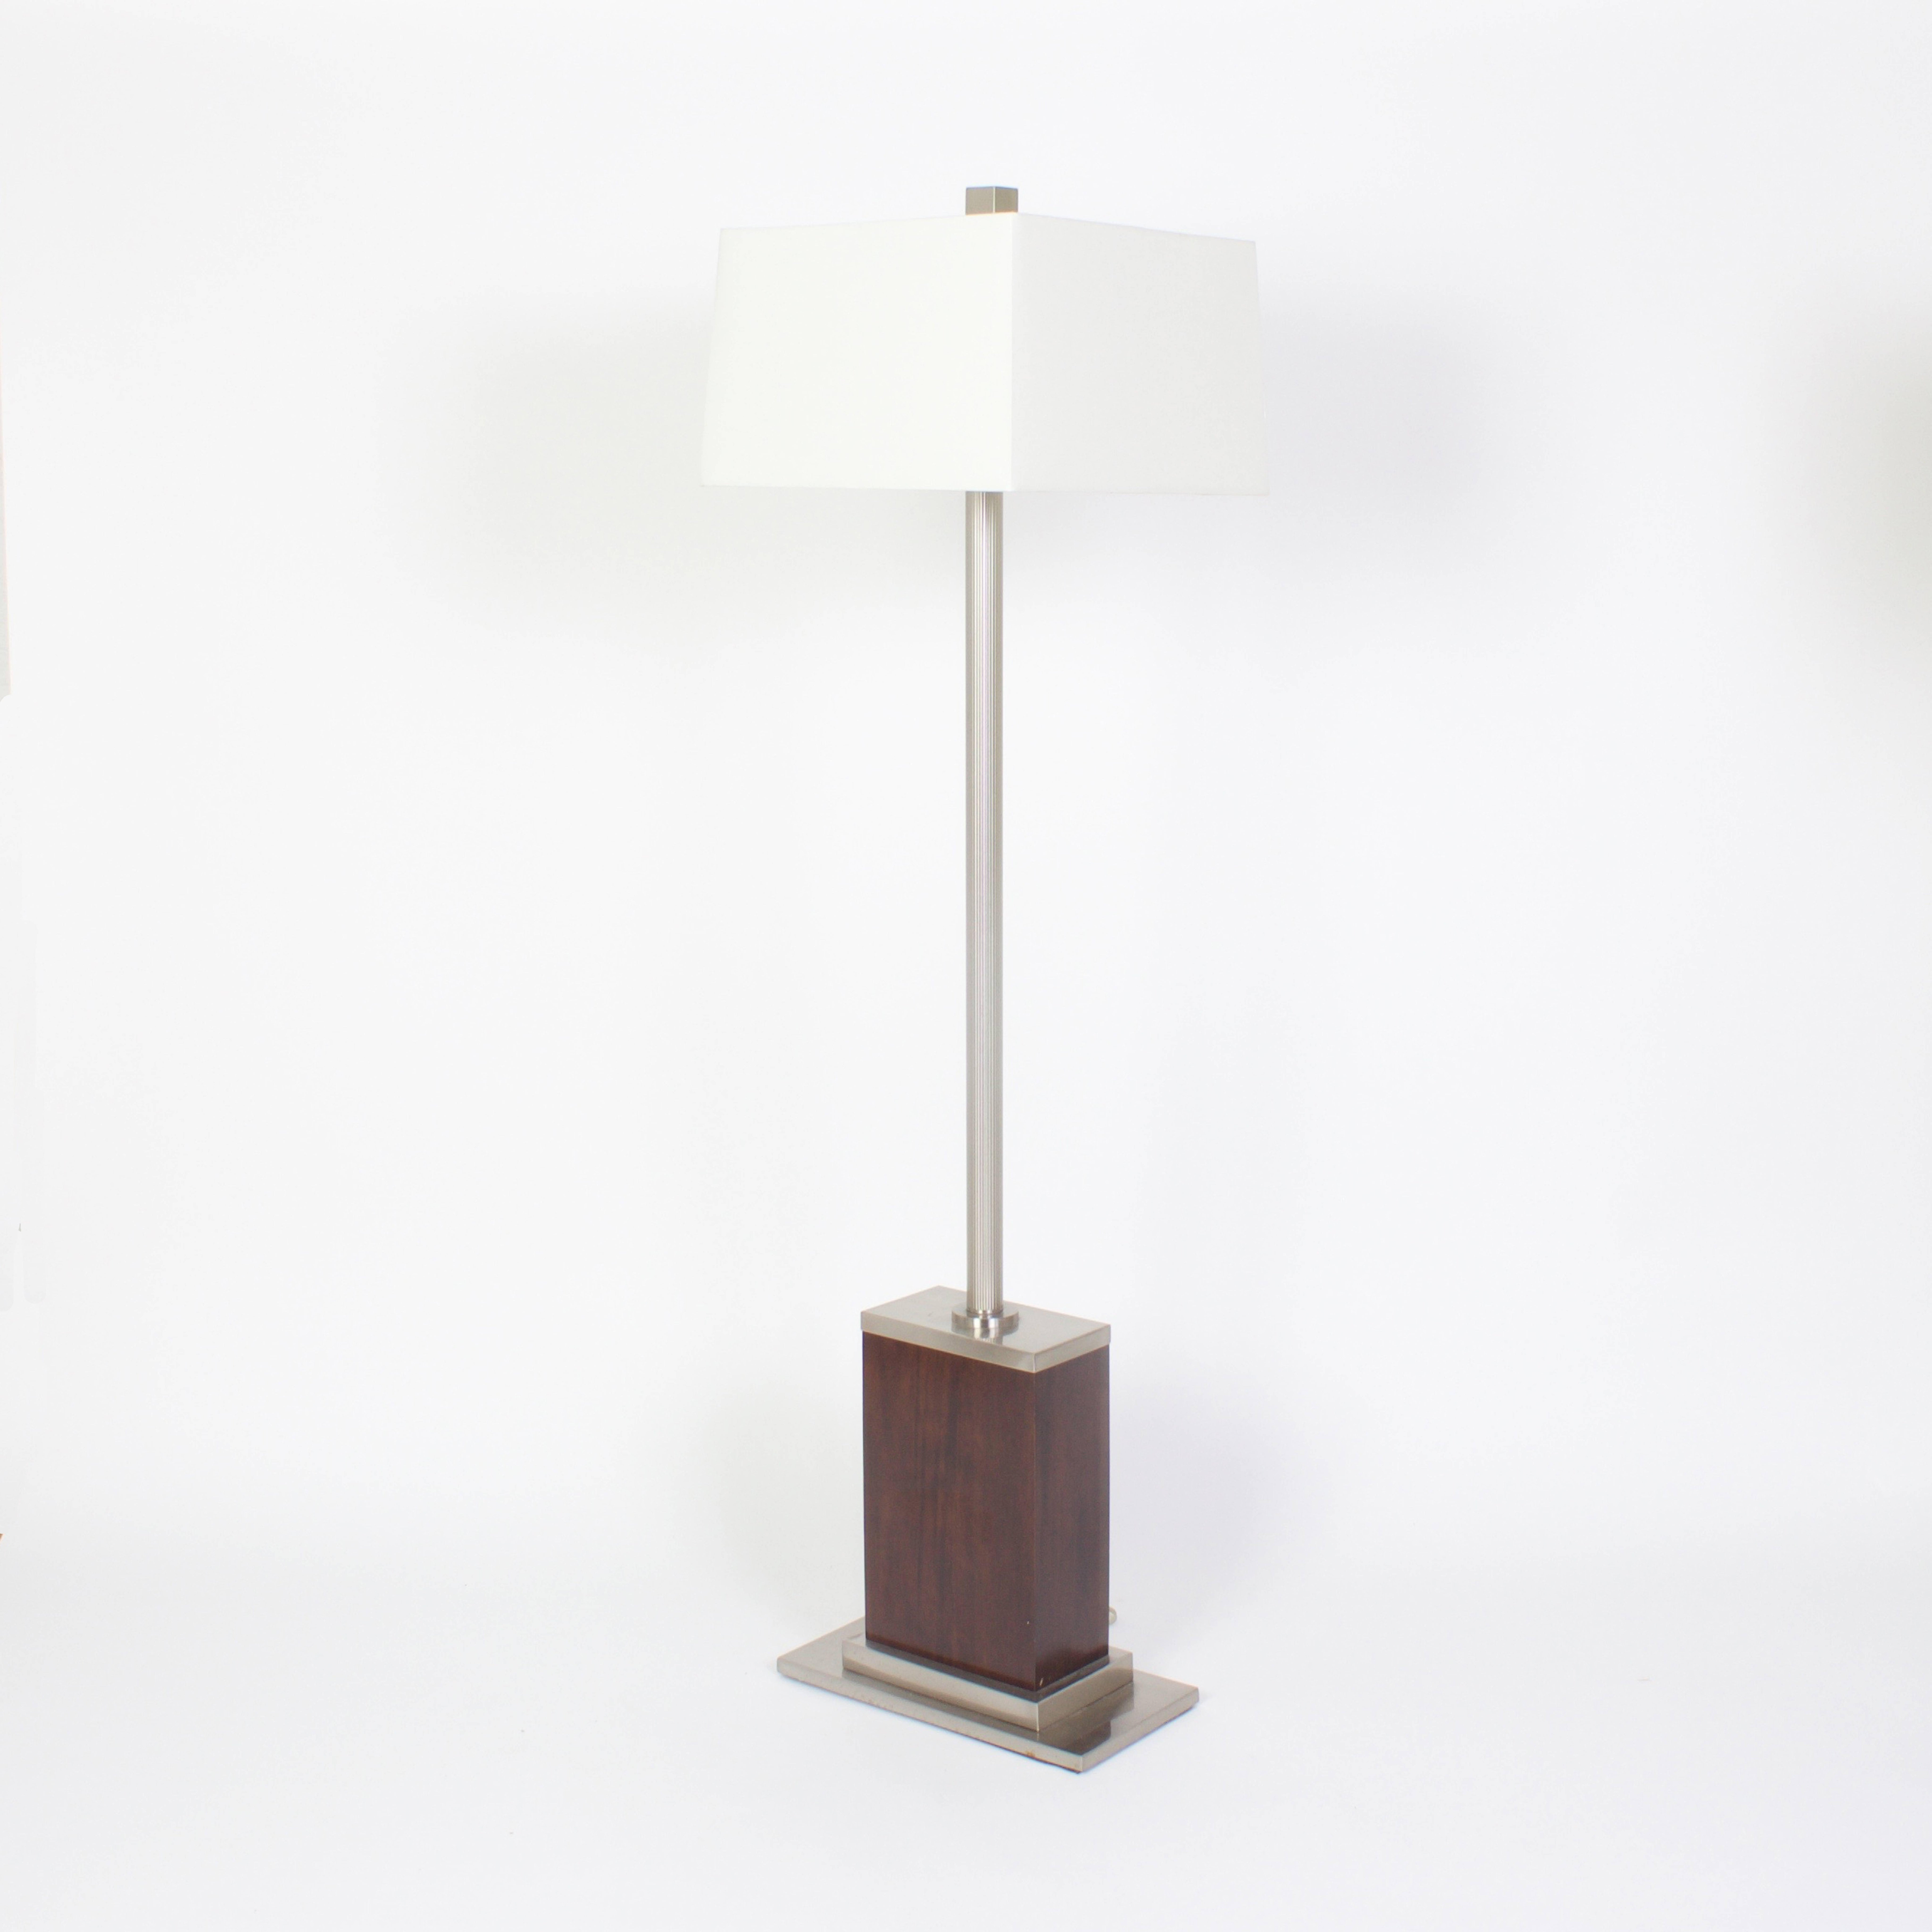 Chic Midcentury pair of floor lamps with an Industrial edge. These aluminum lamps have machined rectangular finials and fluted trunks that are supported by bases of walnut blocks over aluminum plinths. Newly wired. .